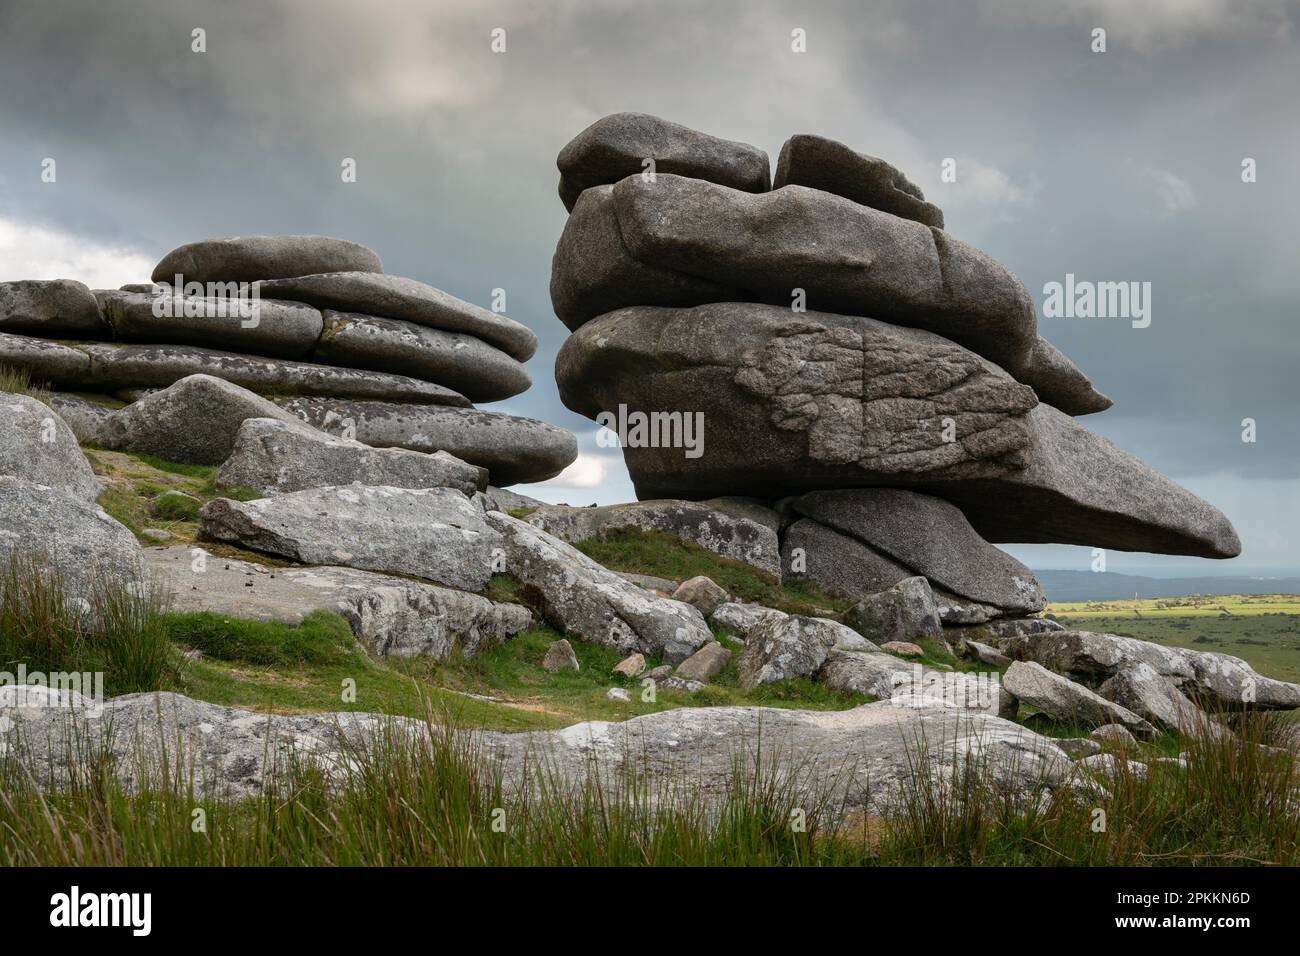 Granite tor on Stowes Hill, Bodmin Moor, Cornwall, England, United Kingdom, Europe Stock Photo